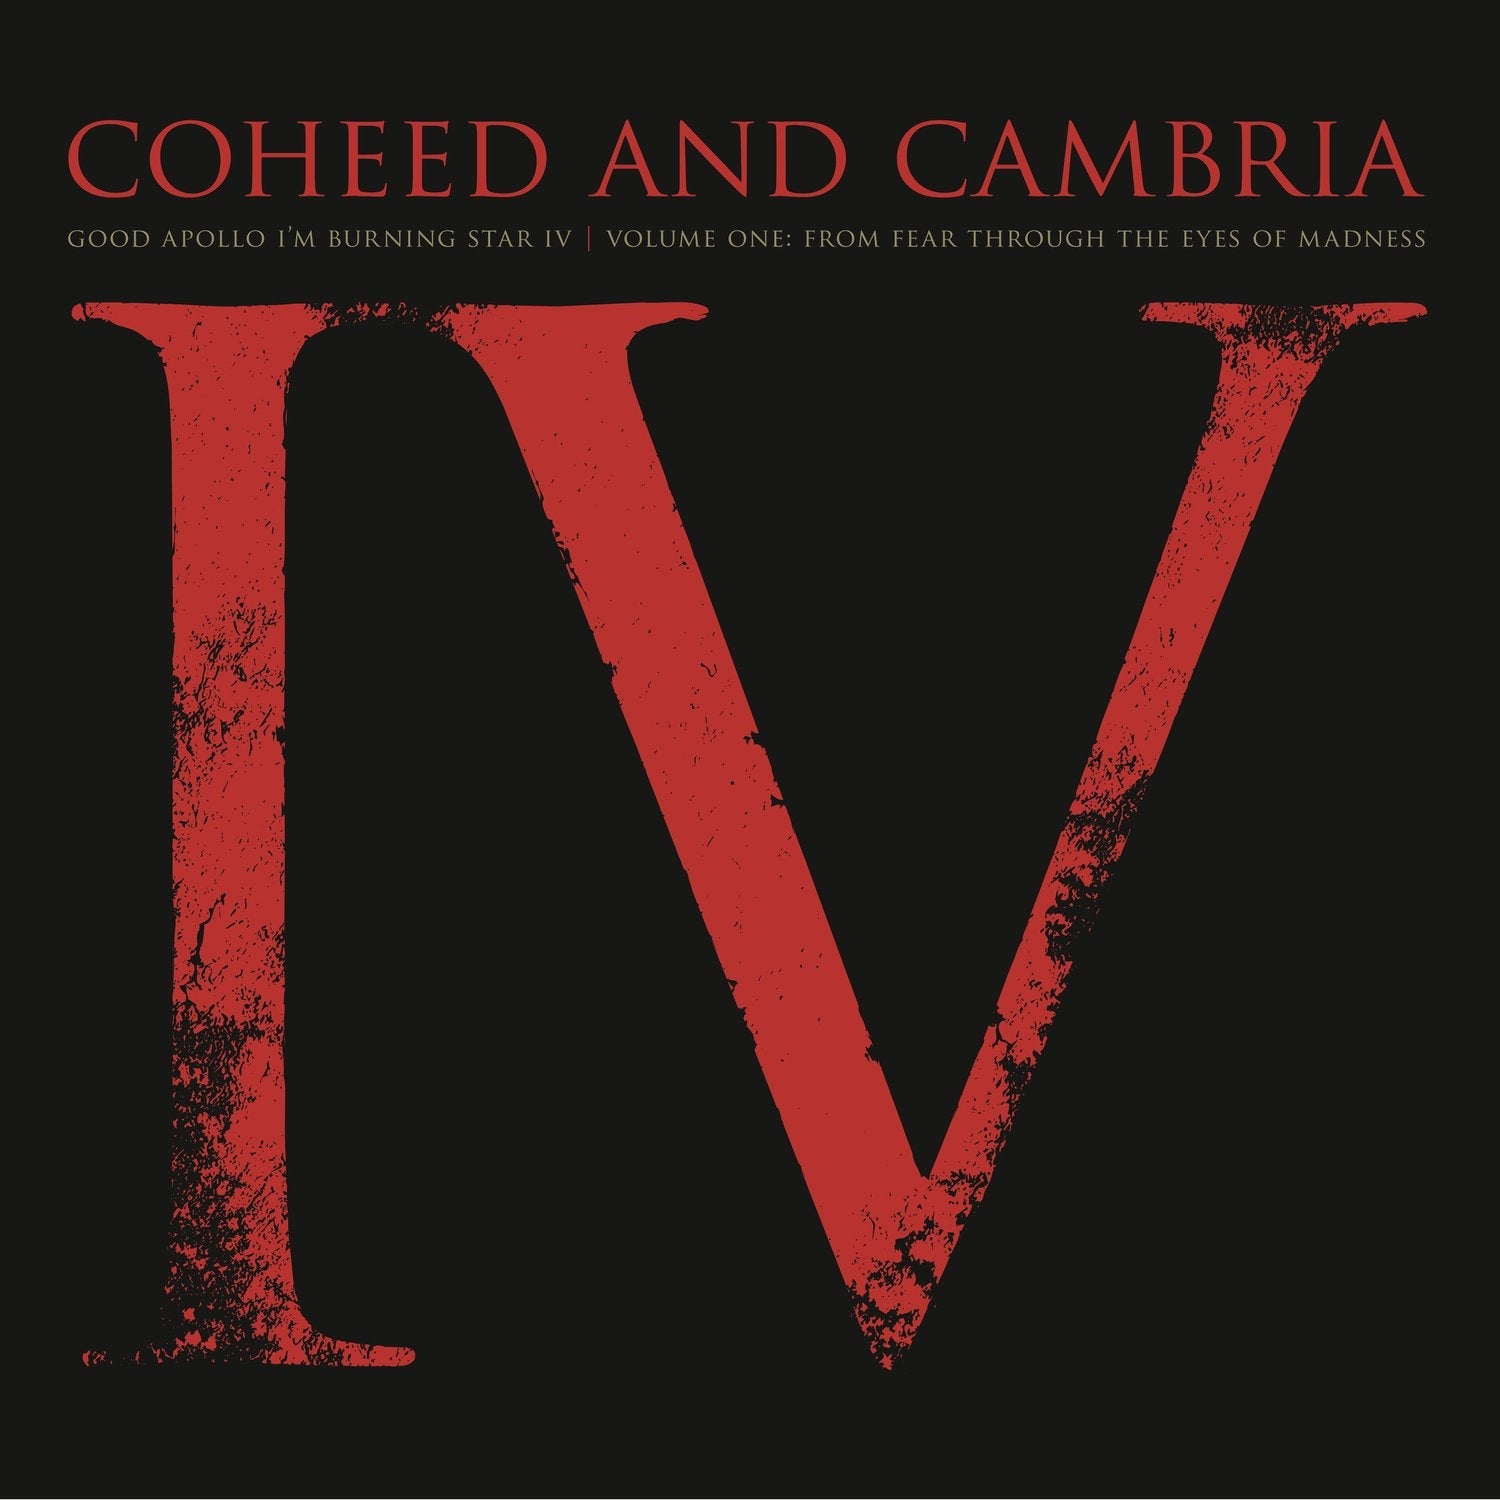 Coheed and Cambria: Good Apollo I'm Burning Star IV | Volume One: From Fear Through The Eyes of Madness: 2LP Vinyl - Steadfast Records